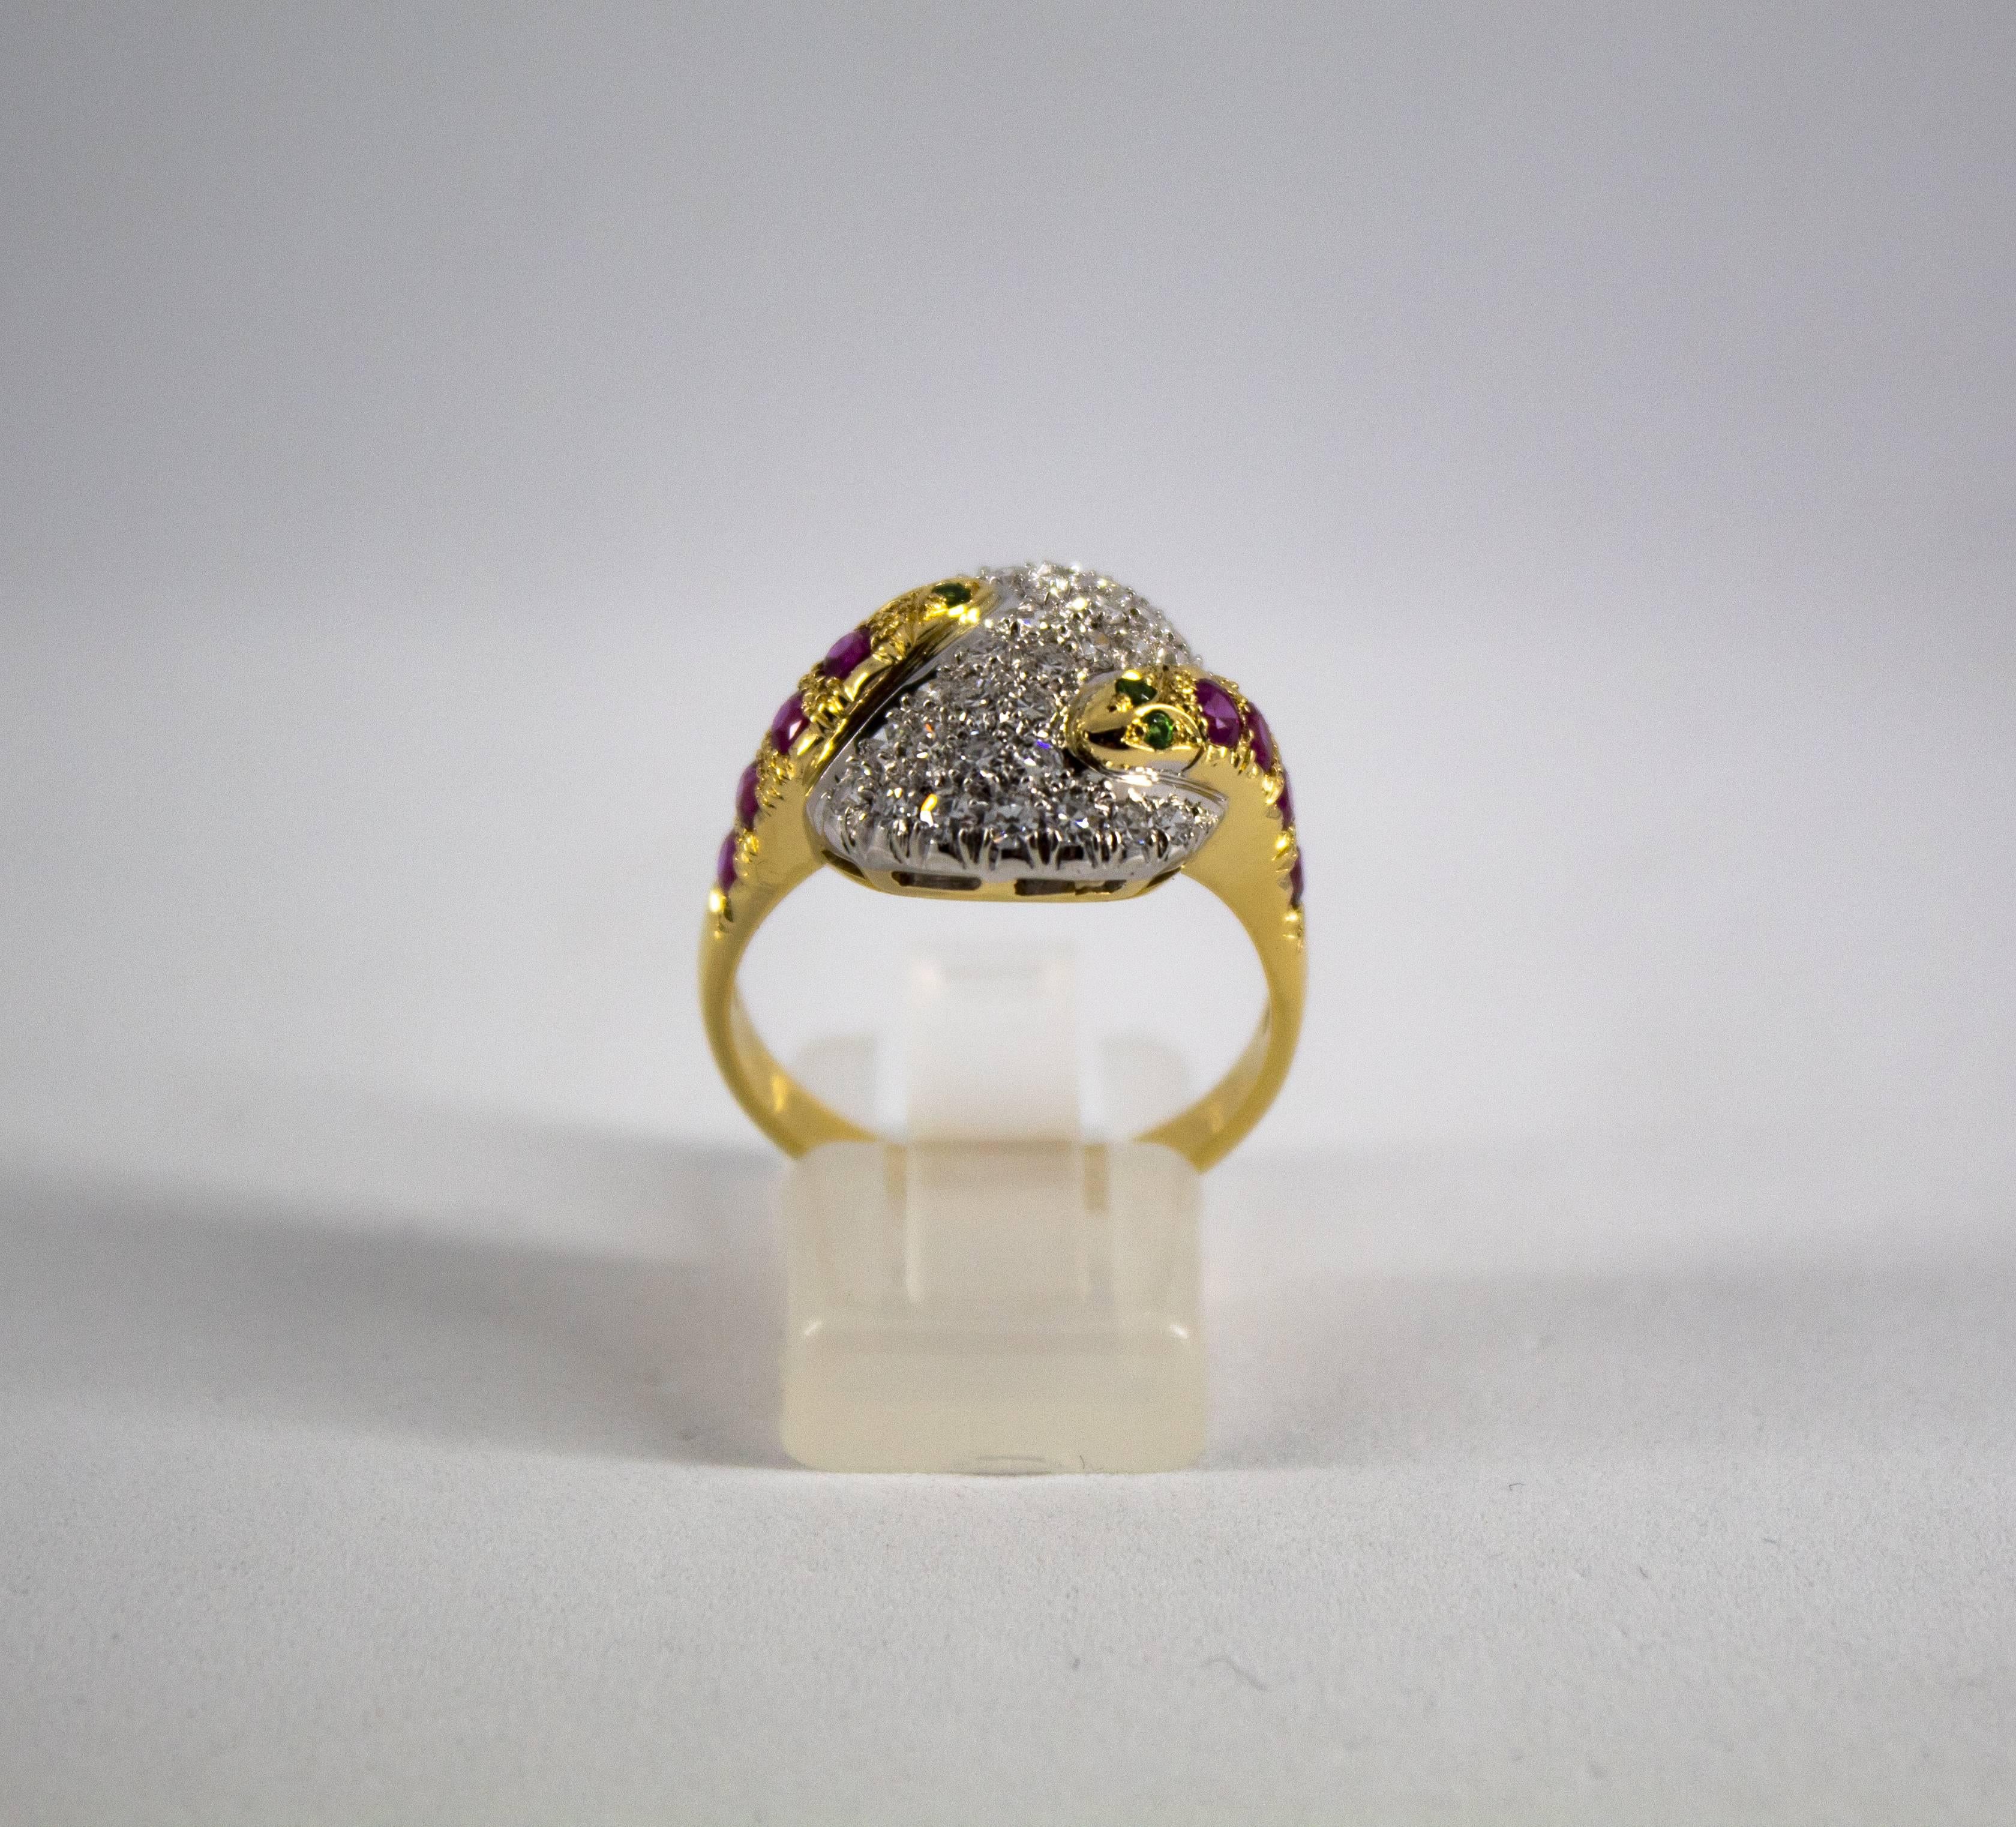 This Ring is made of 18K Yellow Gold.
This Ring has 0.90 Carats of White Diamonds.
This Ring has 0.40 Carats of Rubies.
This Ring has 0.04 Carats of Tsavorite.
Size ITA: 17 USA: 8
We're a workshop so every piece is handmade, customizable and